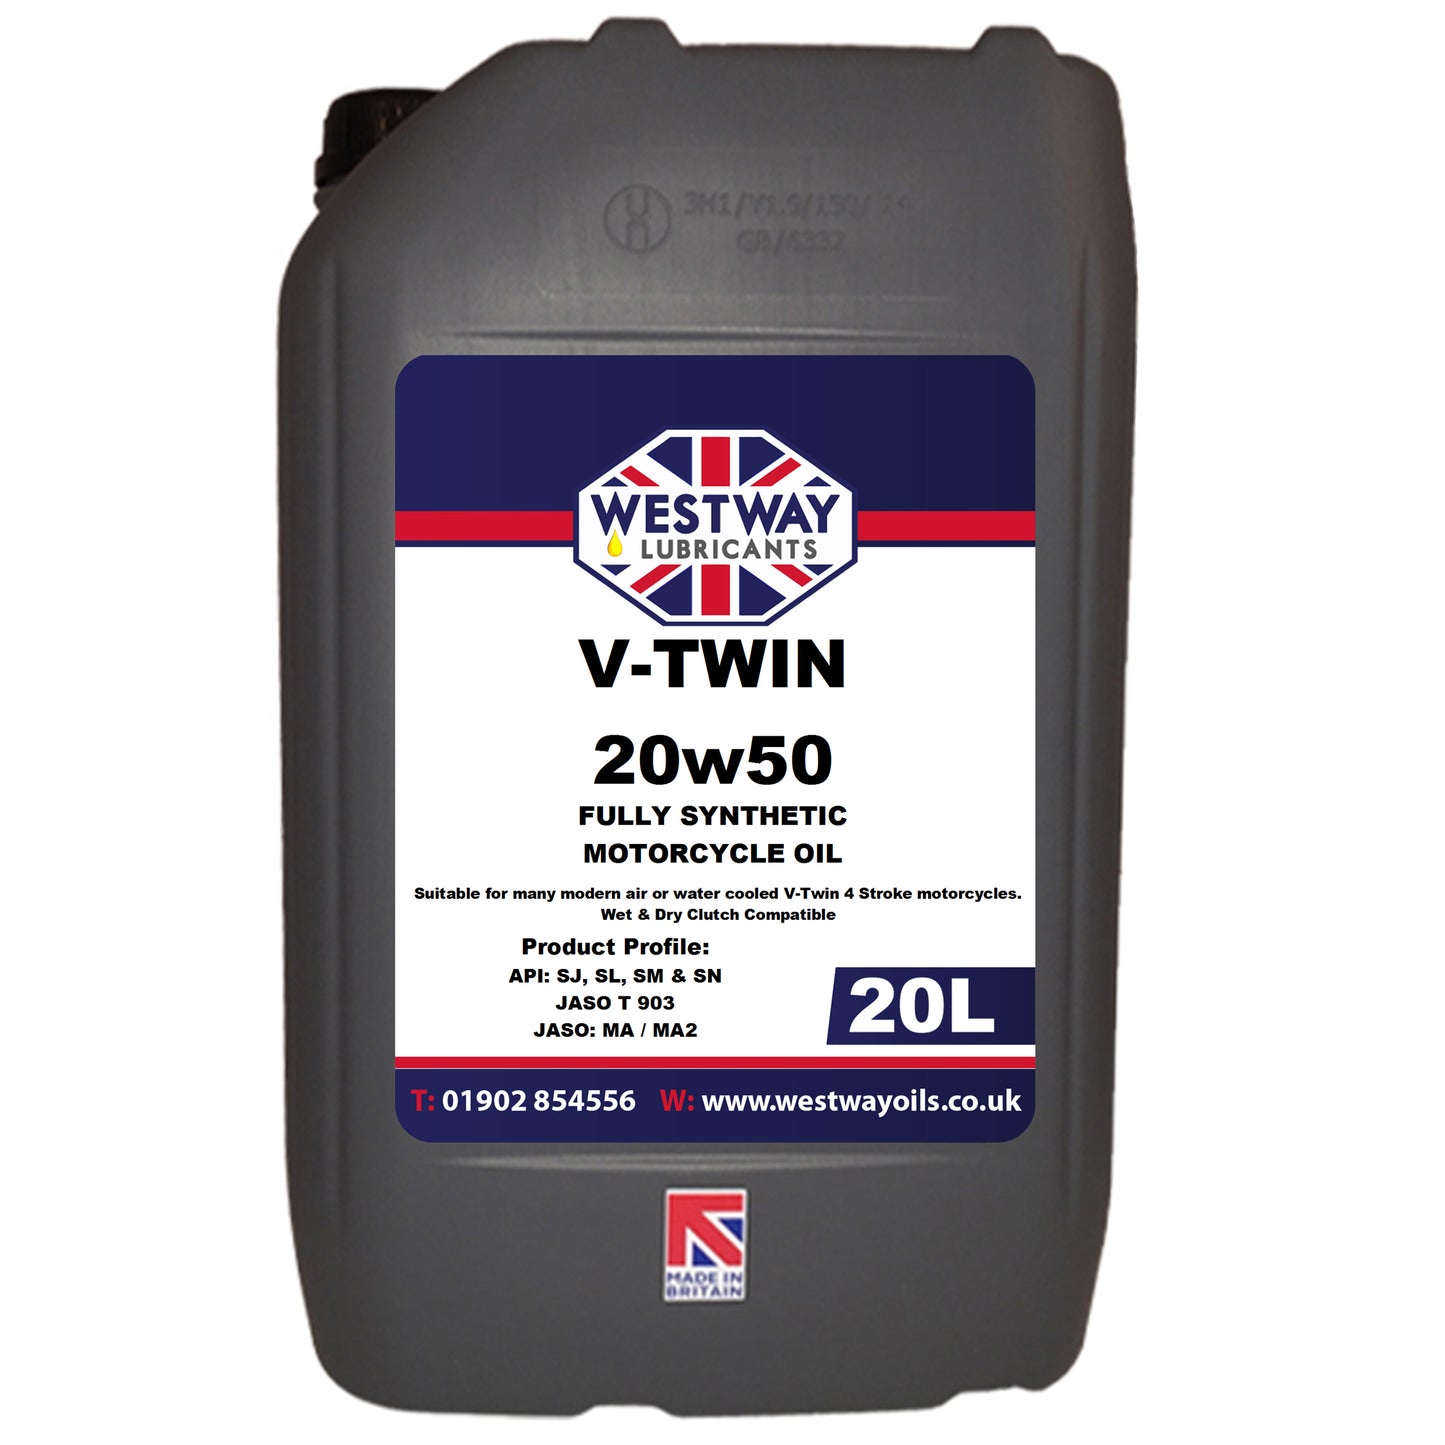 20w50 4T Fully Synthetic Motorcycle Oil V-Twin